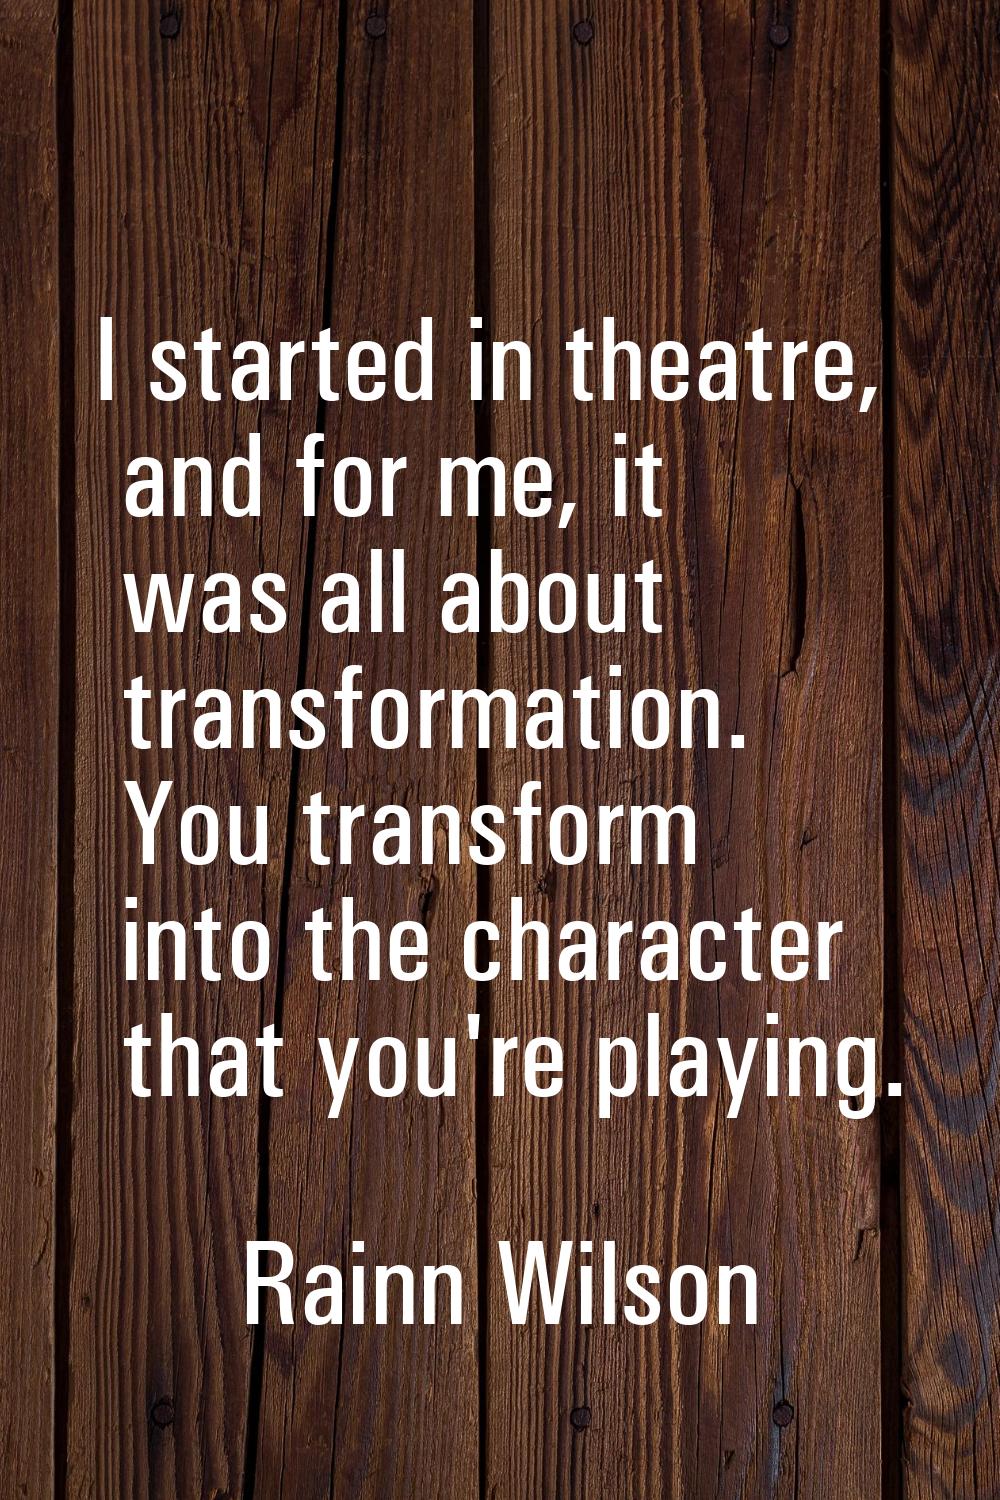 I started in theatre, and for me, it was all about transformation. You transform into the character